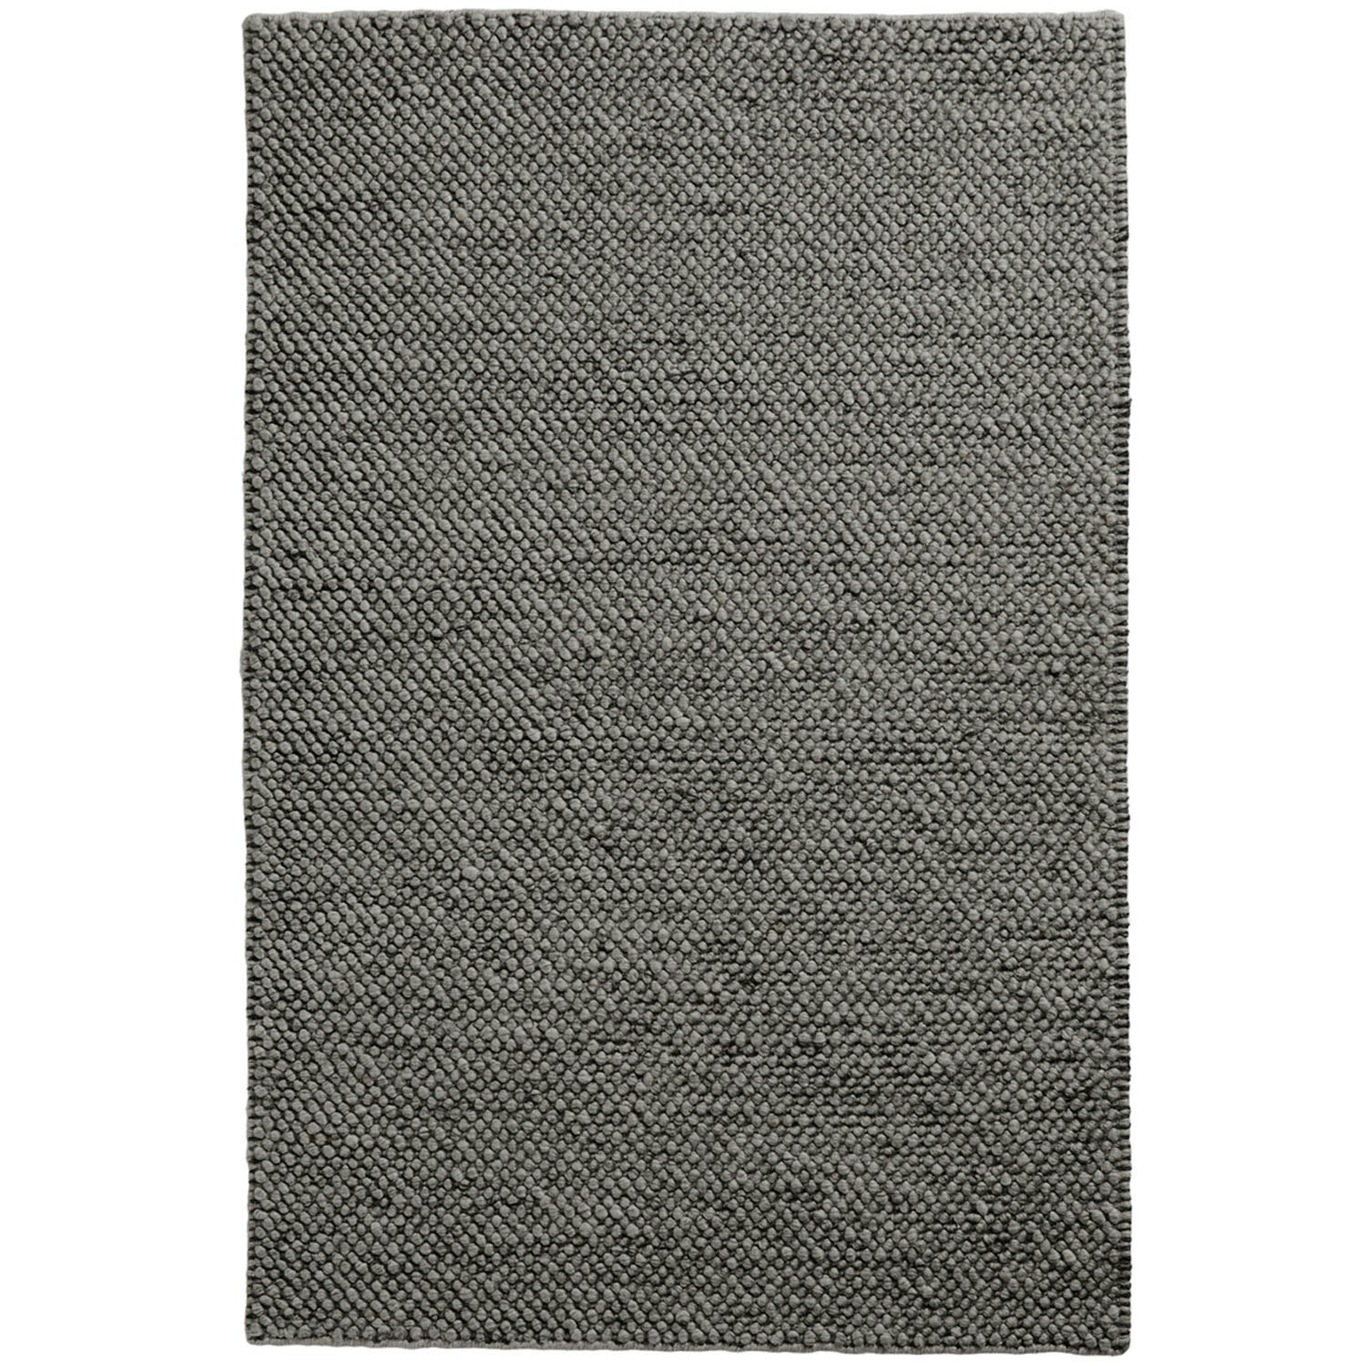 Tact Rug Wool 200x300 cm, Anthracite Grey